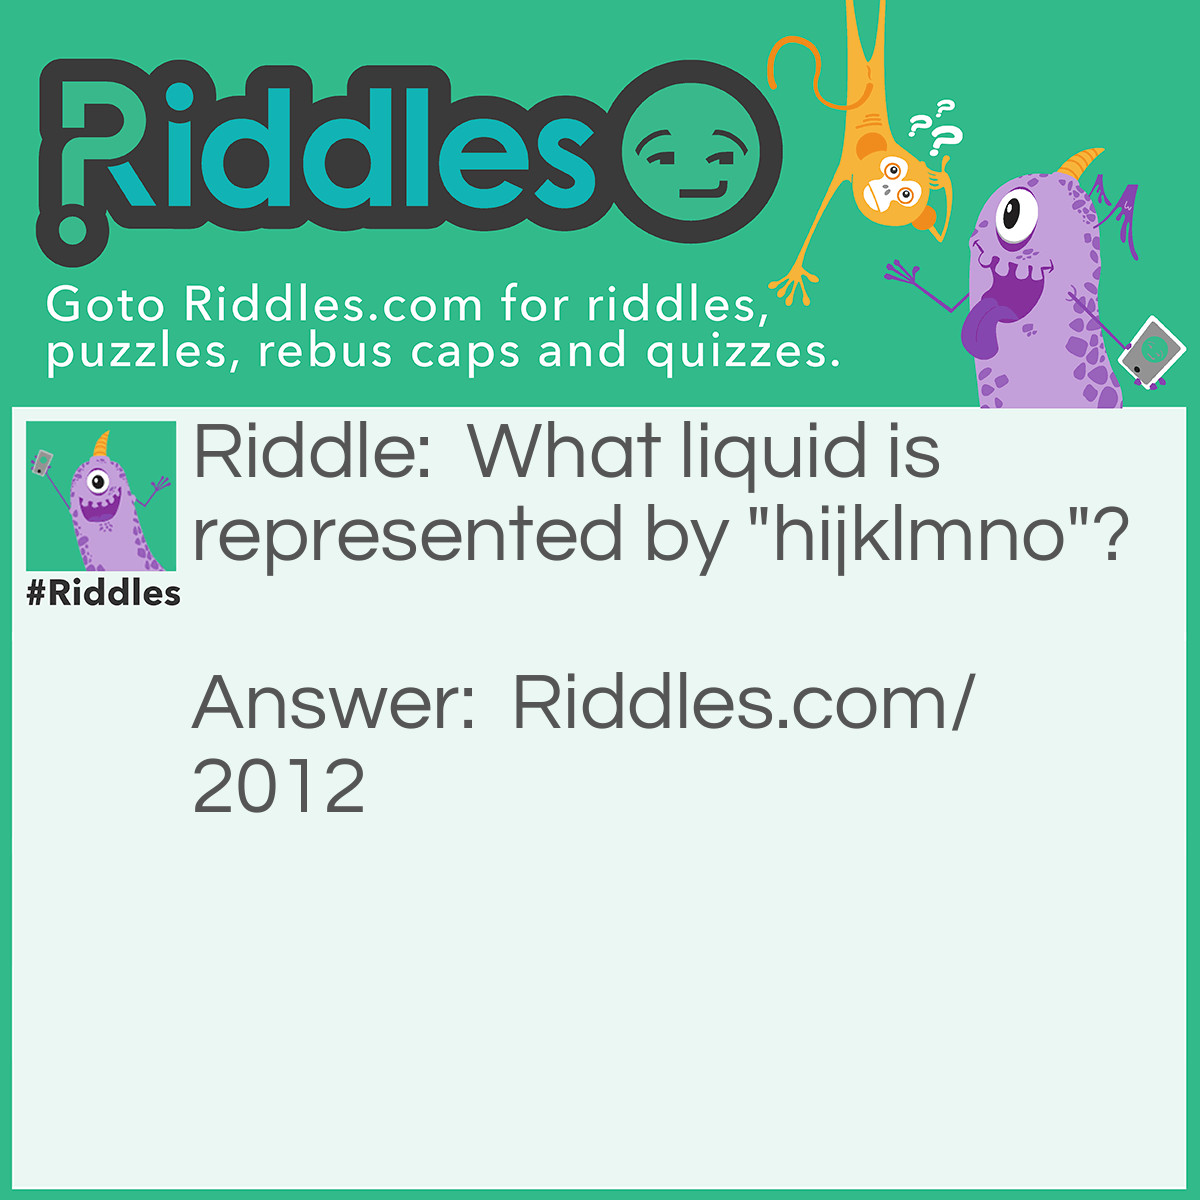 Riddle: What liquid is represented by <strong>"</strong><strong>hijklmno"</strong>? Answer: Water. Hijklmno is "H to O" in the alphabet. Water is H20.